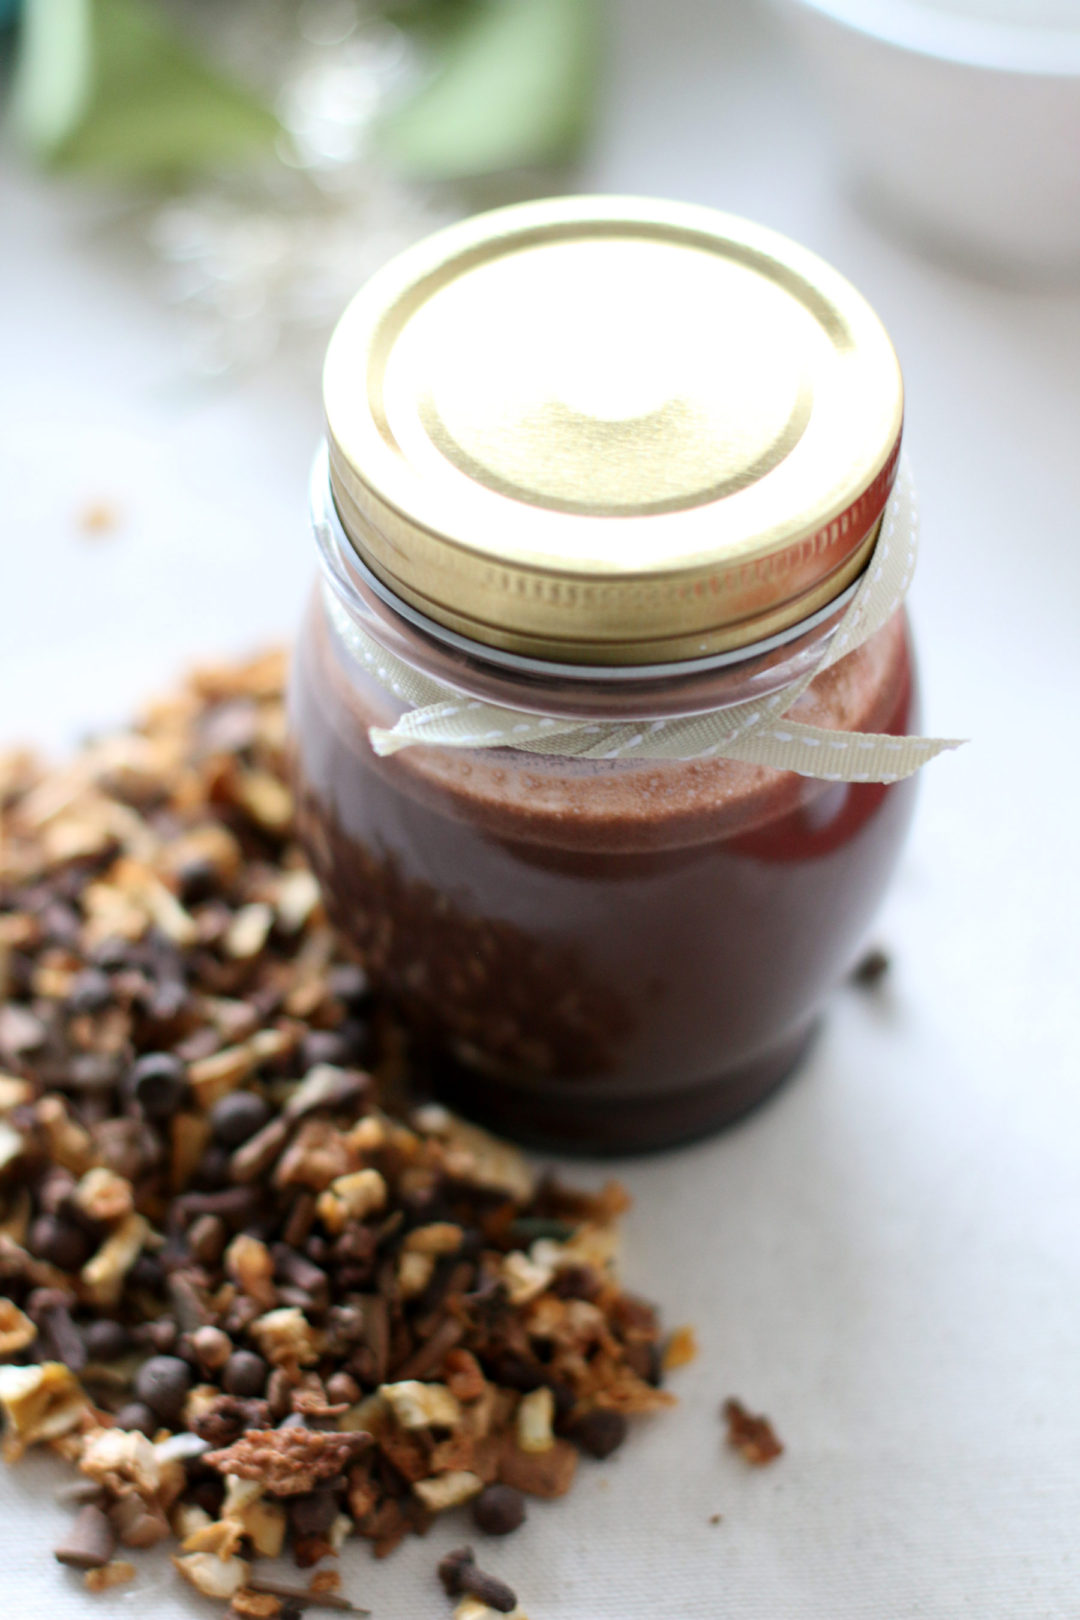 Edible gift ideas: Mulled Chocolate Sauce